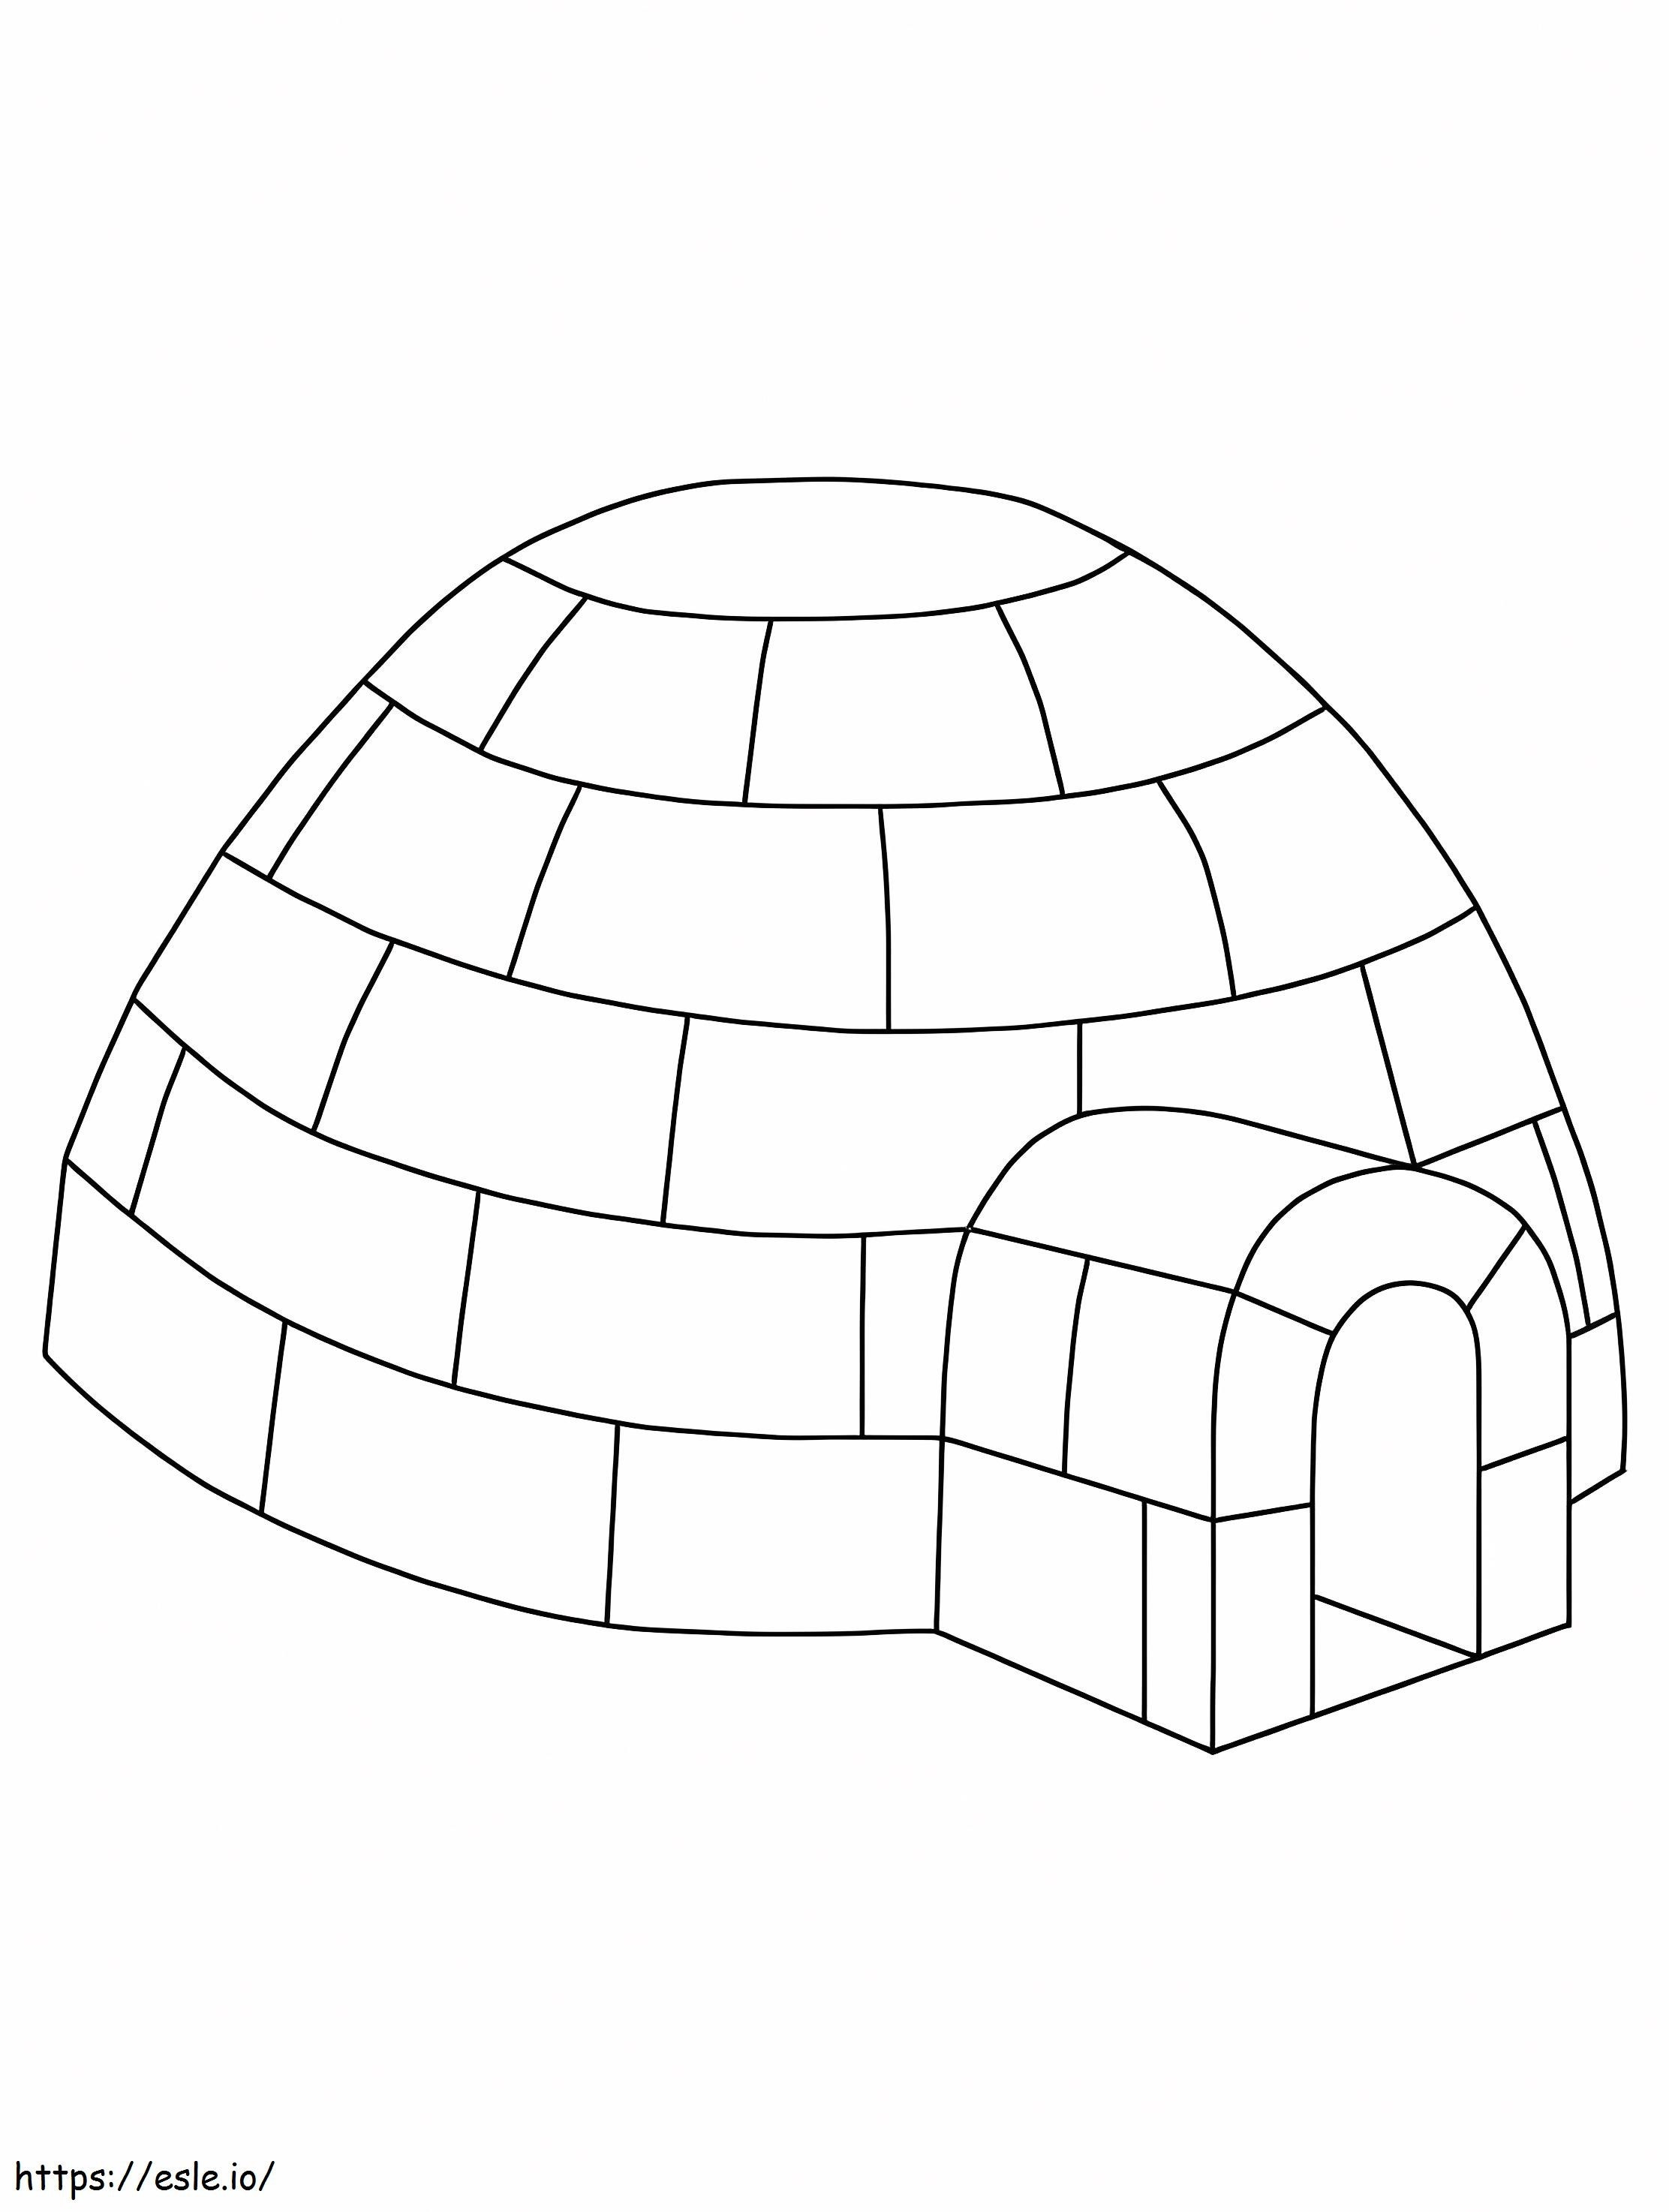 Igloo 7 coloring page